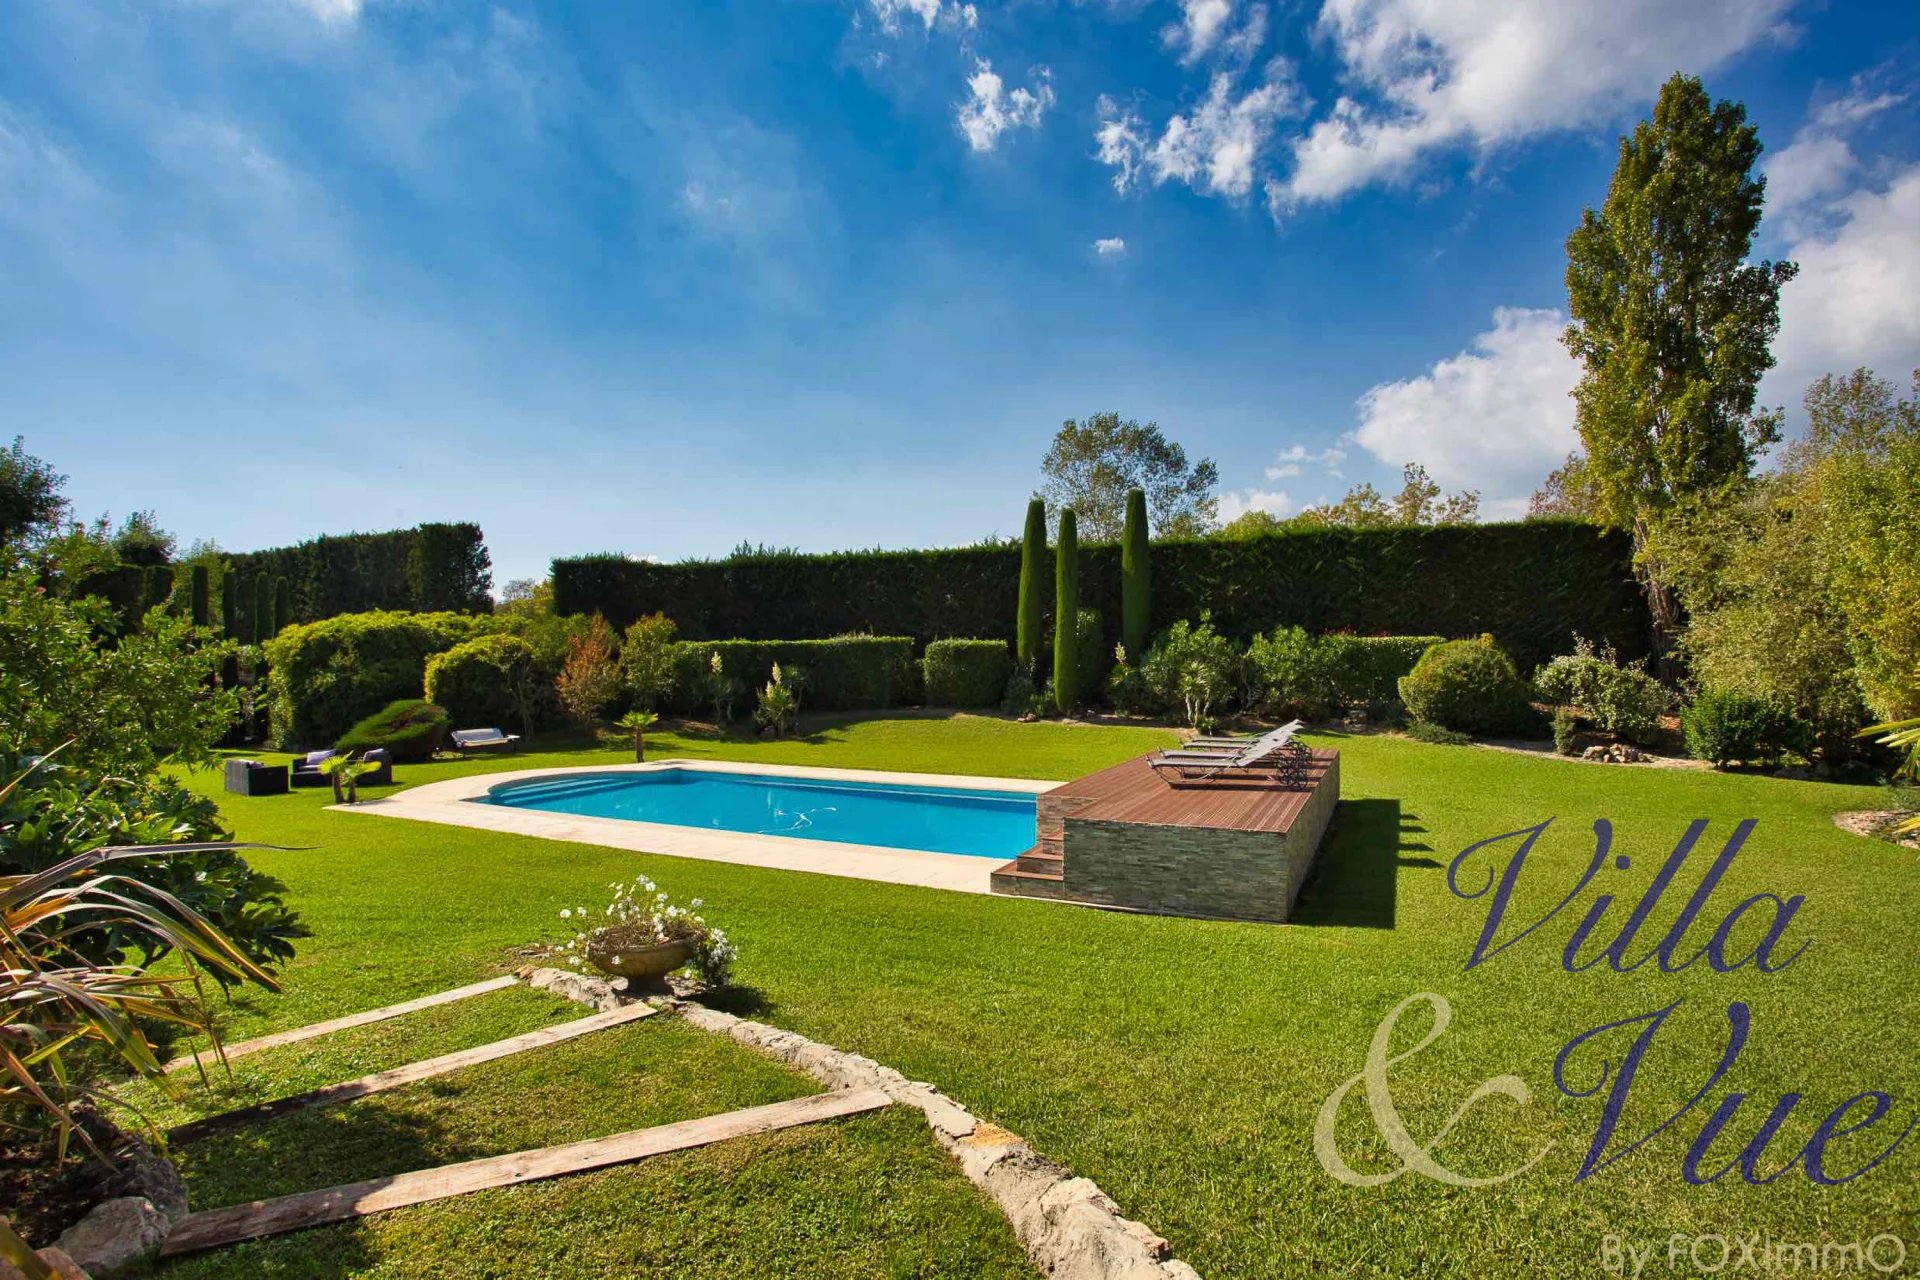 Chateauneuf, Magnificent Bastide, 280m2, 5 bedrooms, outbuilding, 5000m2 of flat and landscaped grounds, swimming pool, triple garage